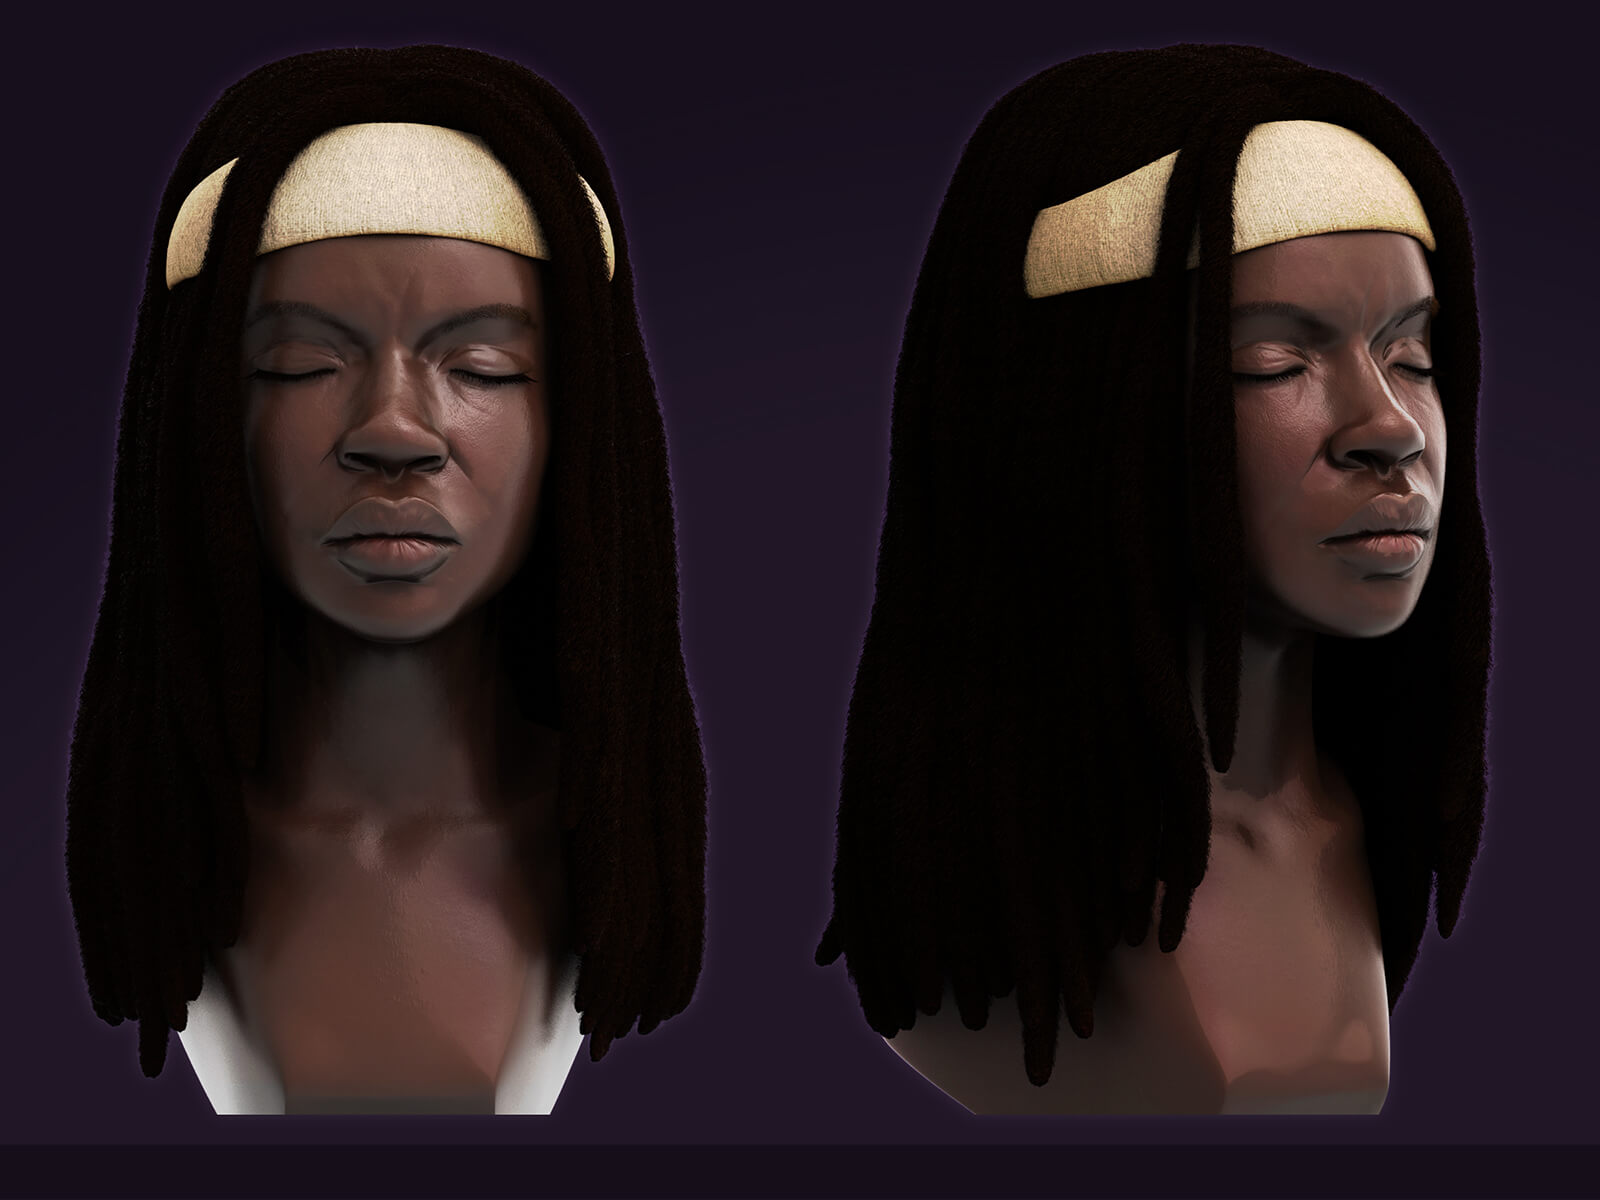 Three angles of a woman with dreadlocks and a white headband